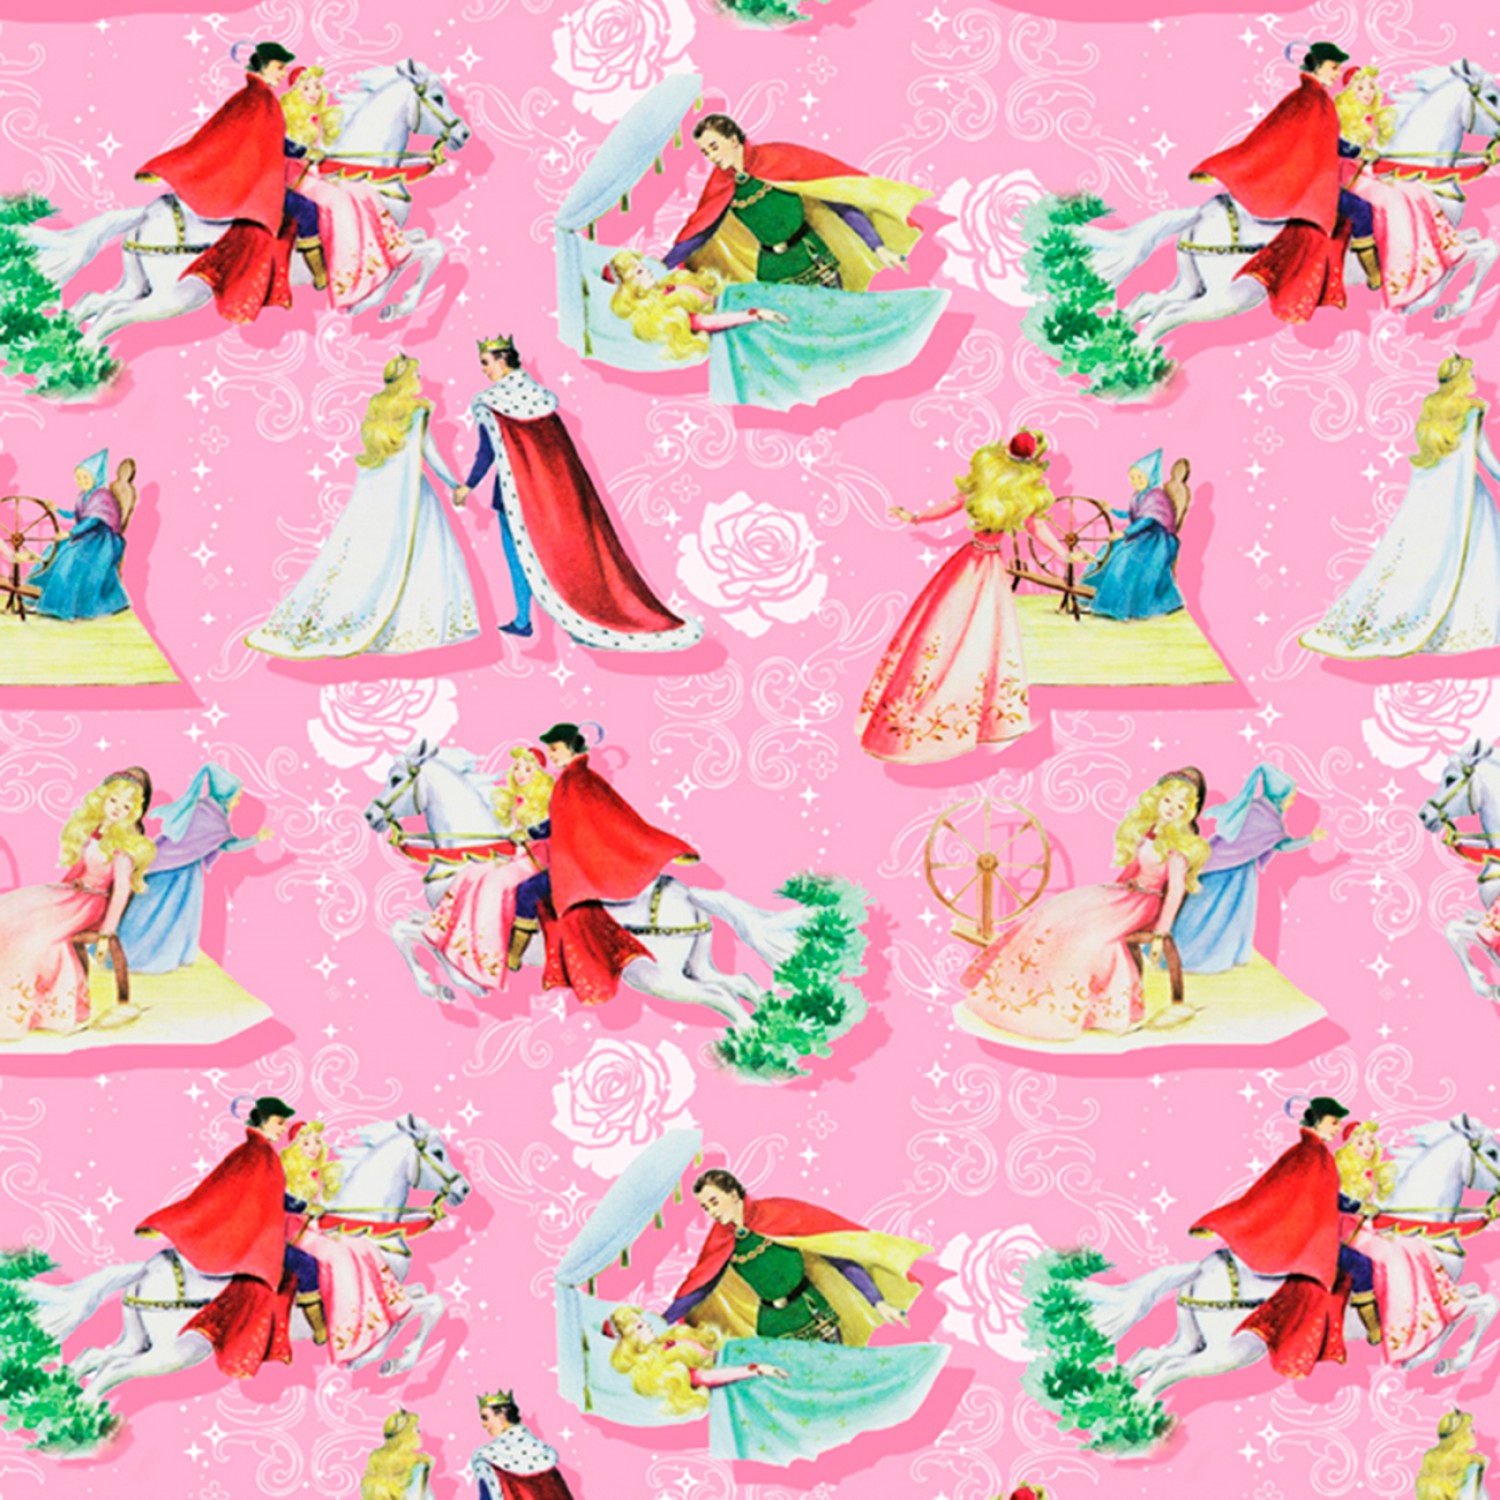 Vintage Storybook Sleeping Beauty Happily Ever After Fabric